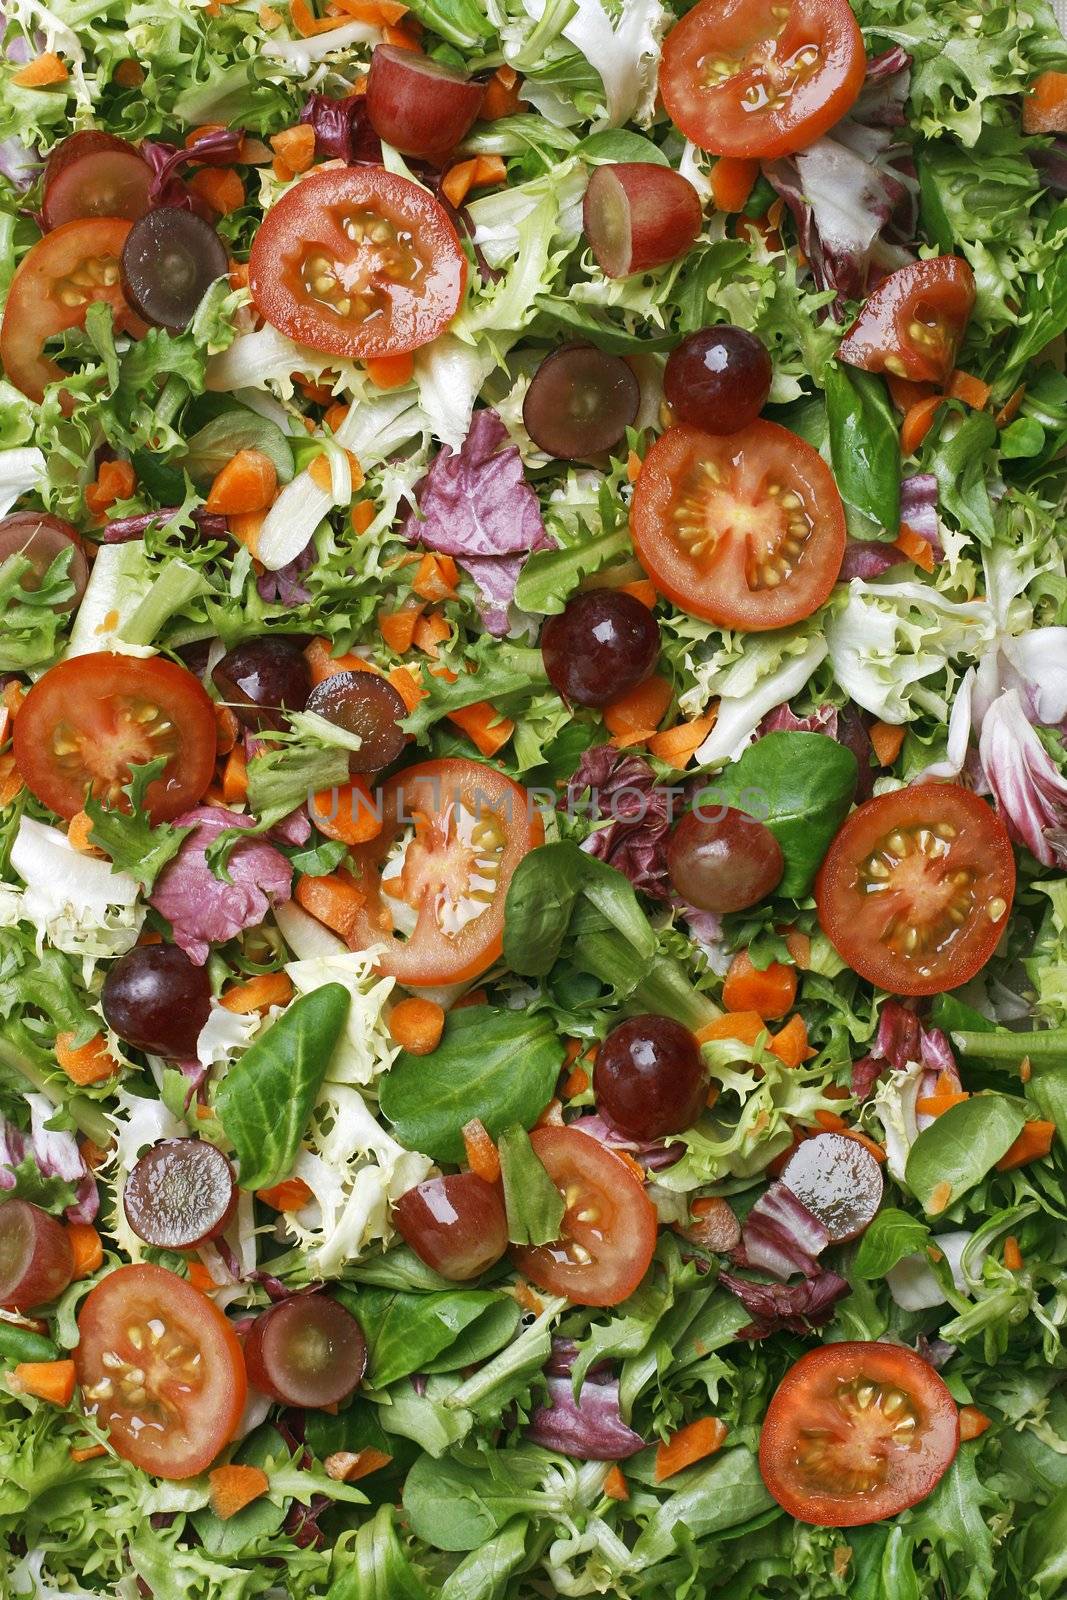 Delicious fresh and healthy salad - perfect as a food related background